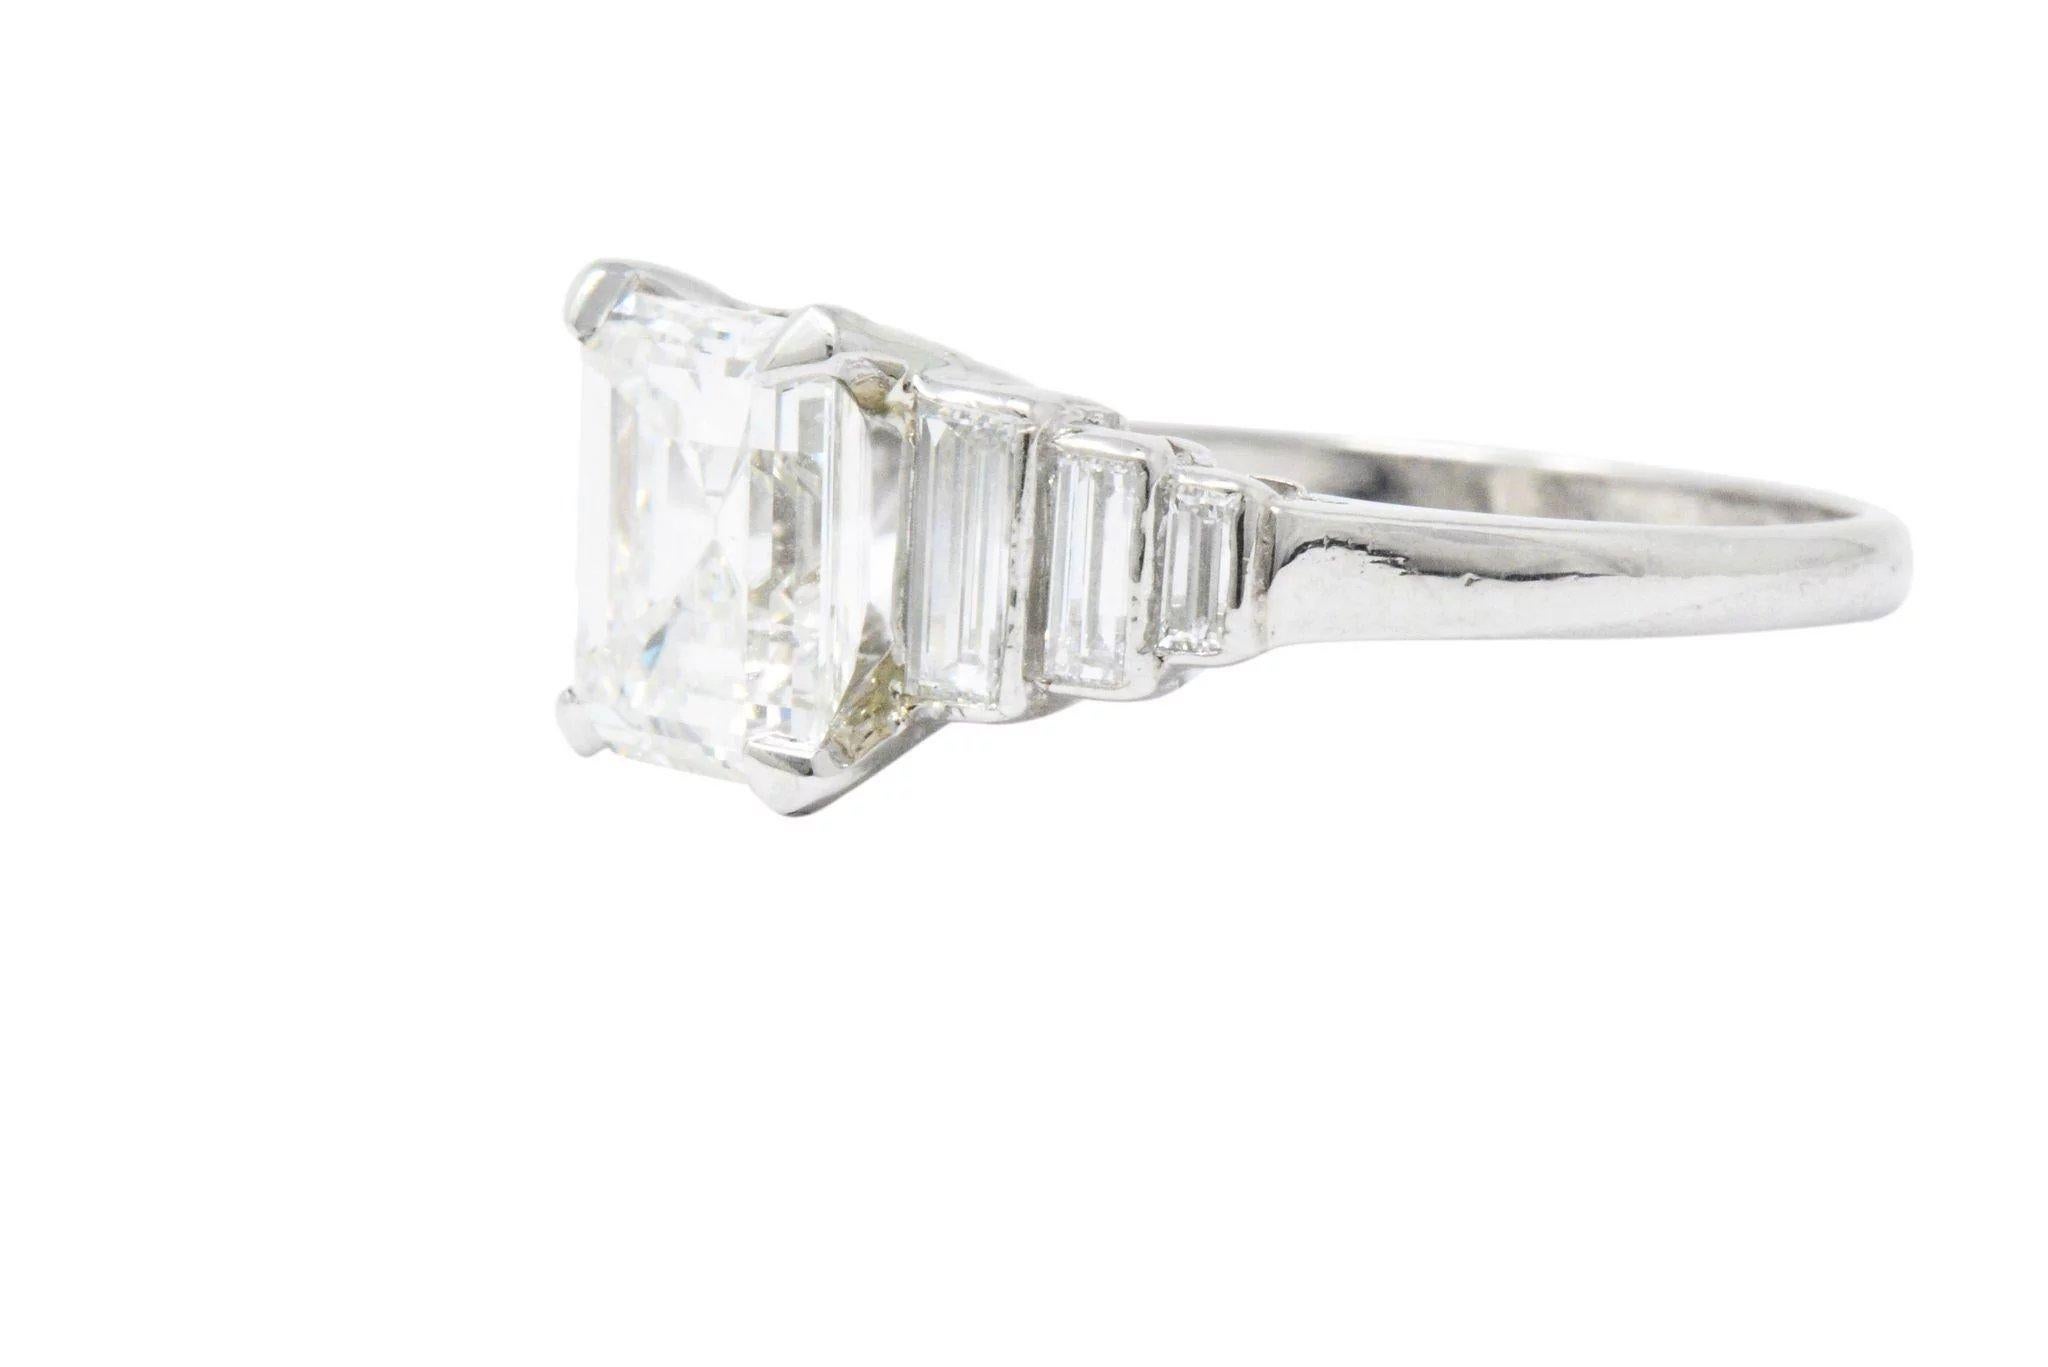 Centering a basket set emerald cut diamond weighing 2.11 carats, I color with VS1 clarity

Flanked by stepped shoulders featuring bezel set baguette cut diamonds weighing approximately 0.60 carat; G to I color with VS clarity

Tested as